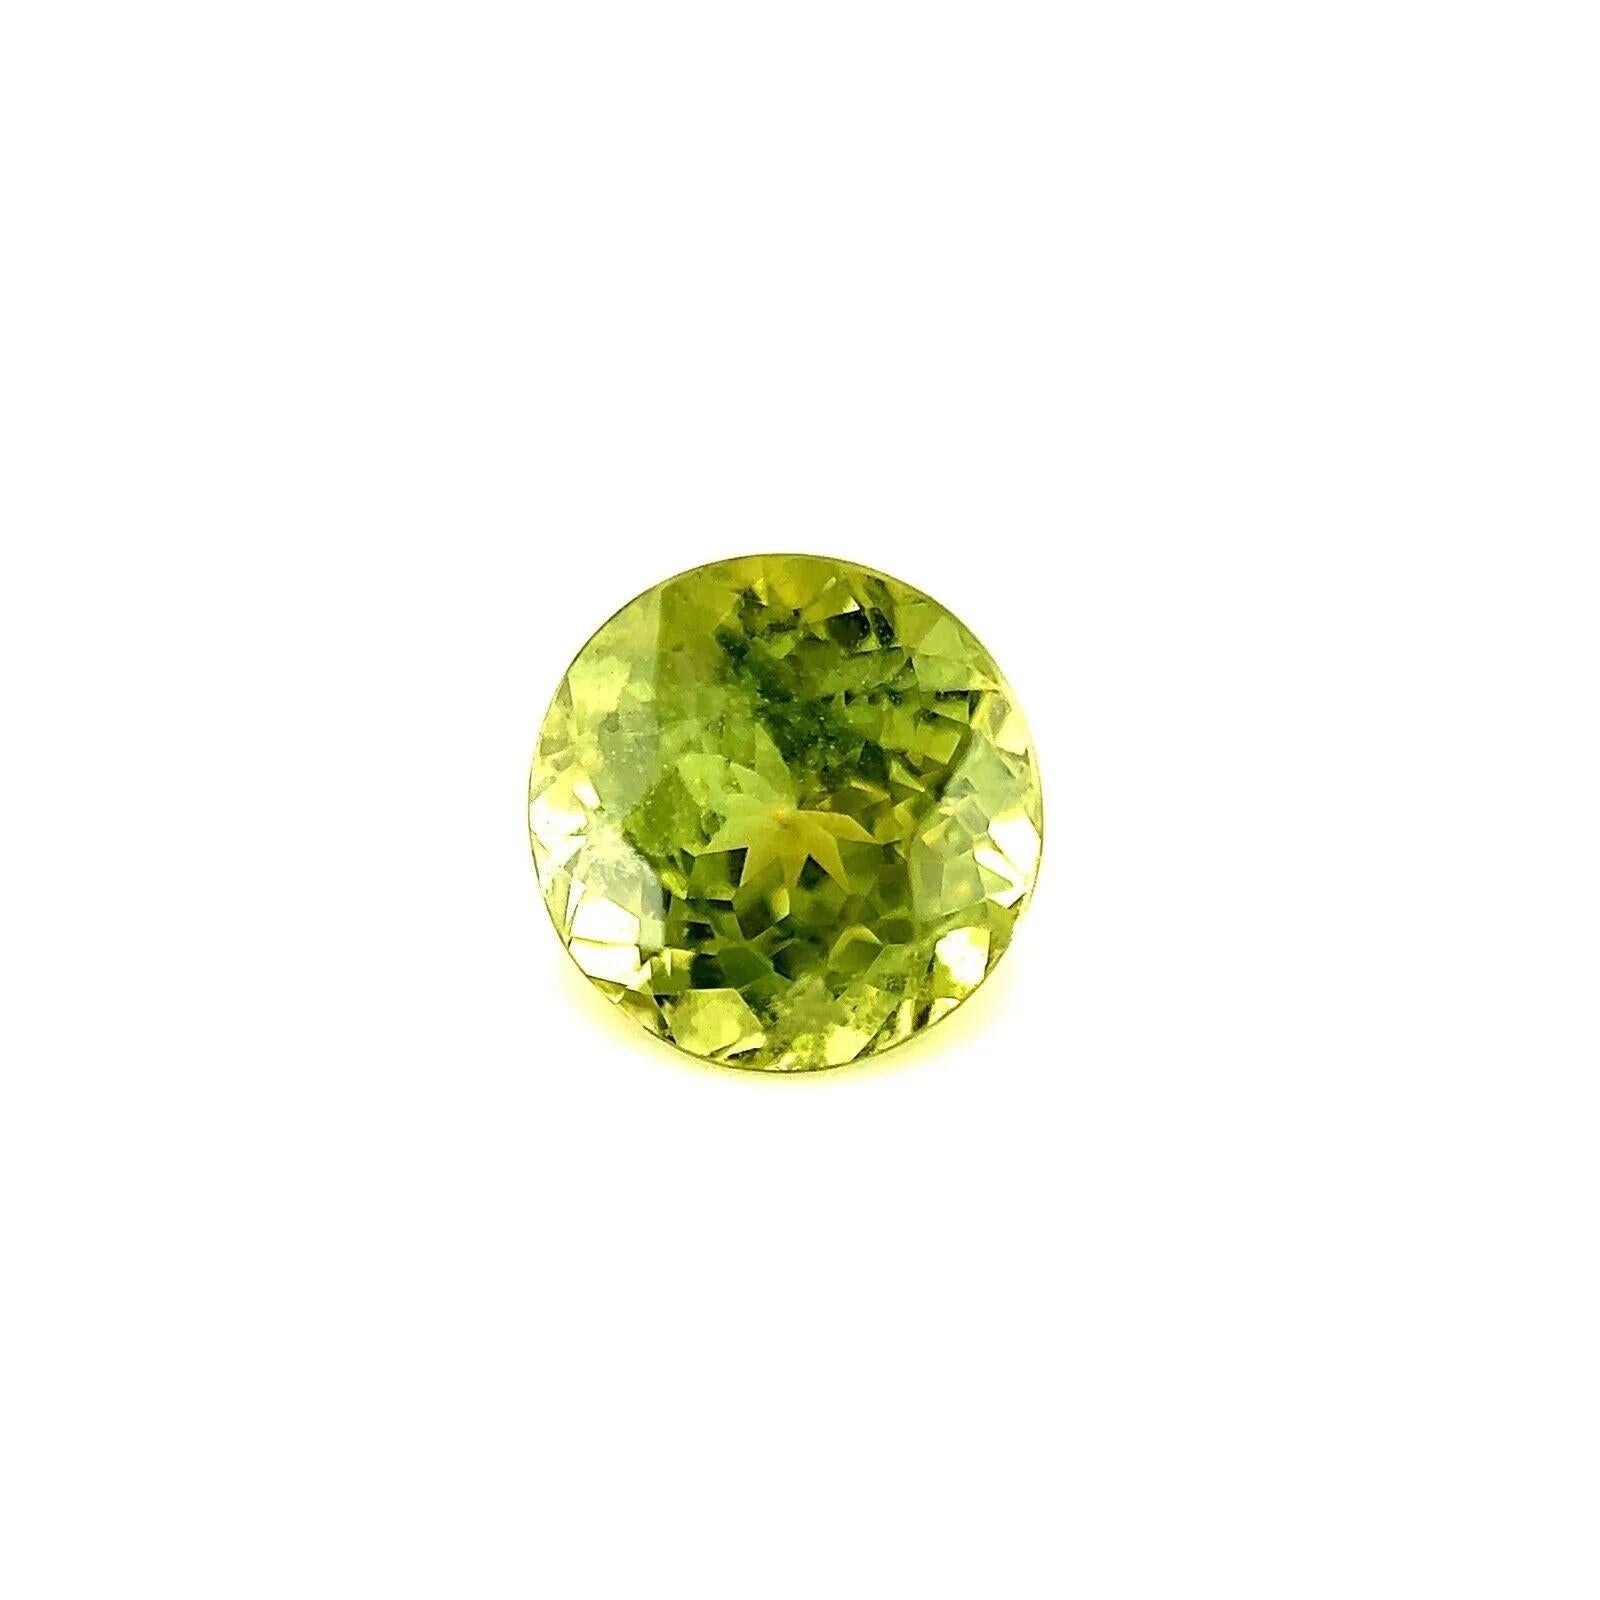 Vivid Yellow Green Sapphire 1.58ct Round Brilliant Cut Loose Gemstone 6.5mm

Natural Yellow Green Round Cut Sapphire.
1.58 Carat with a bright yellow green colour. Also has good clarity, a clean stone with only some small natural inclusions